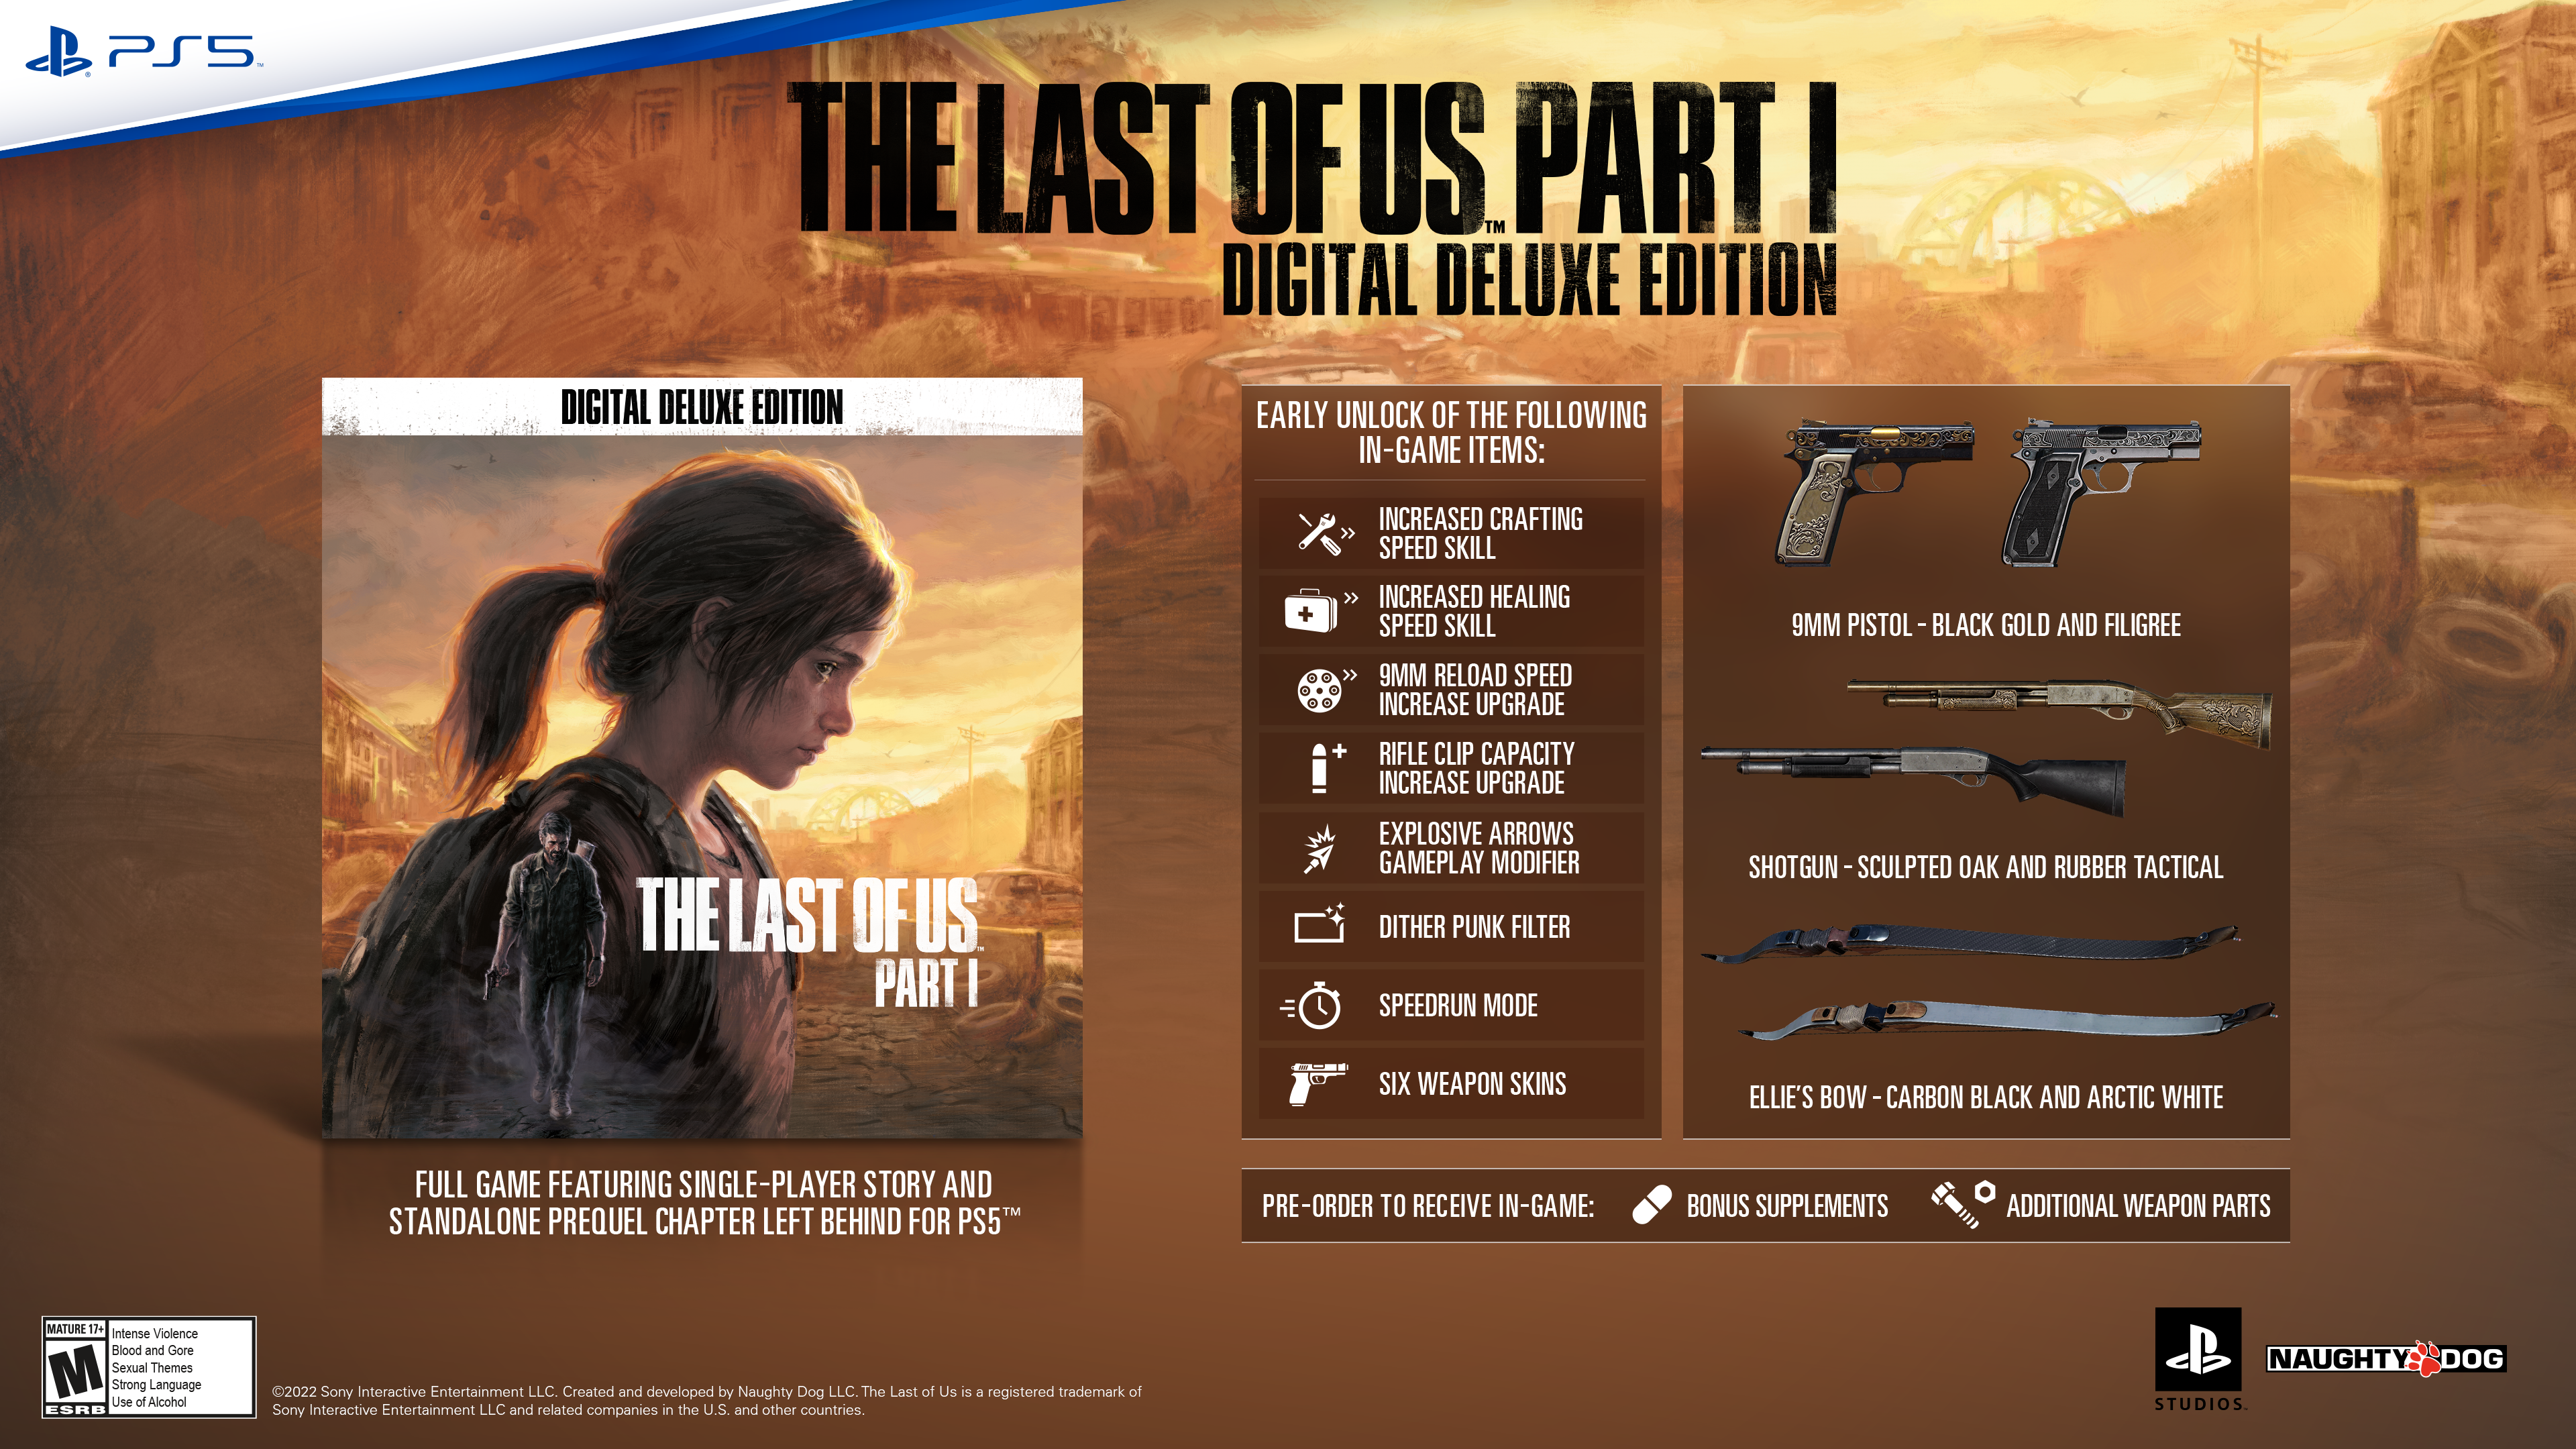 The Last of Us Playstation